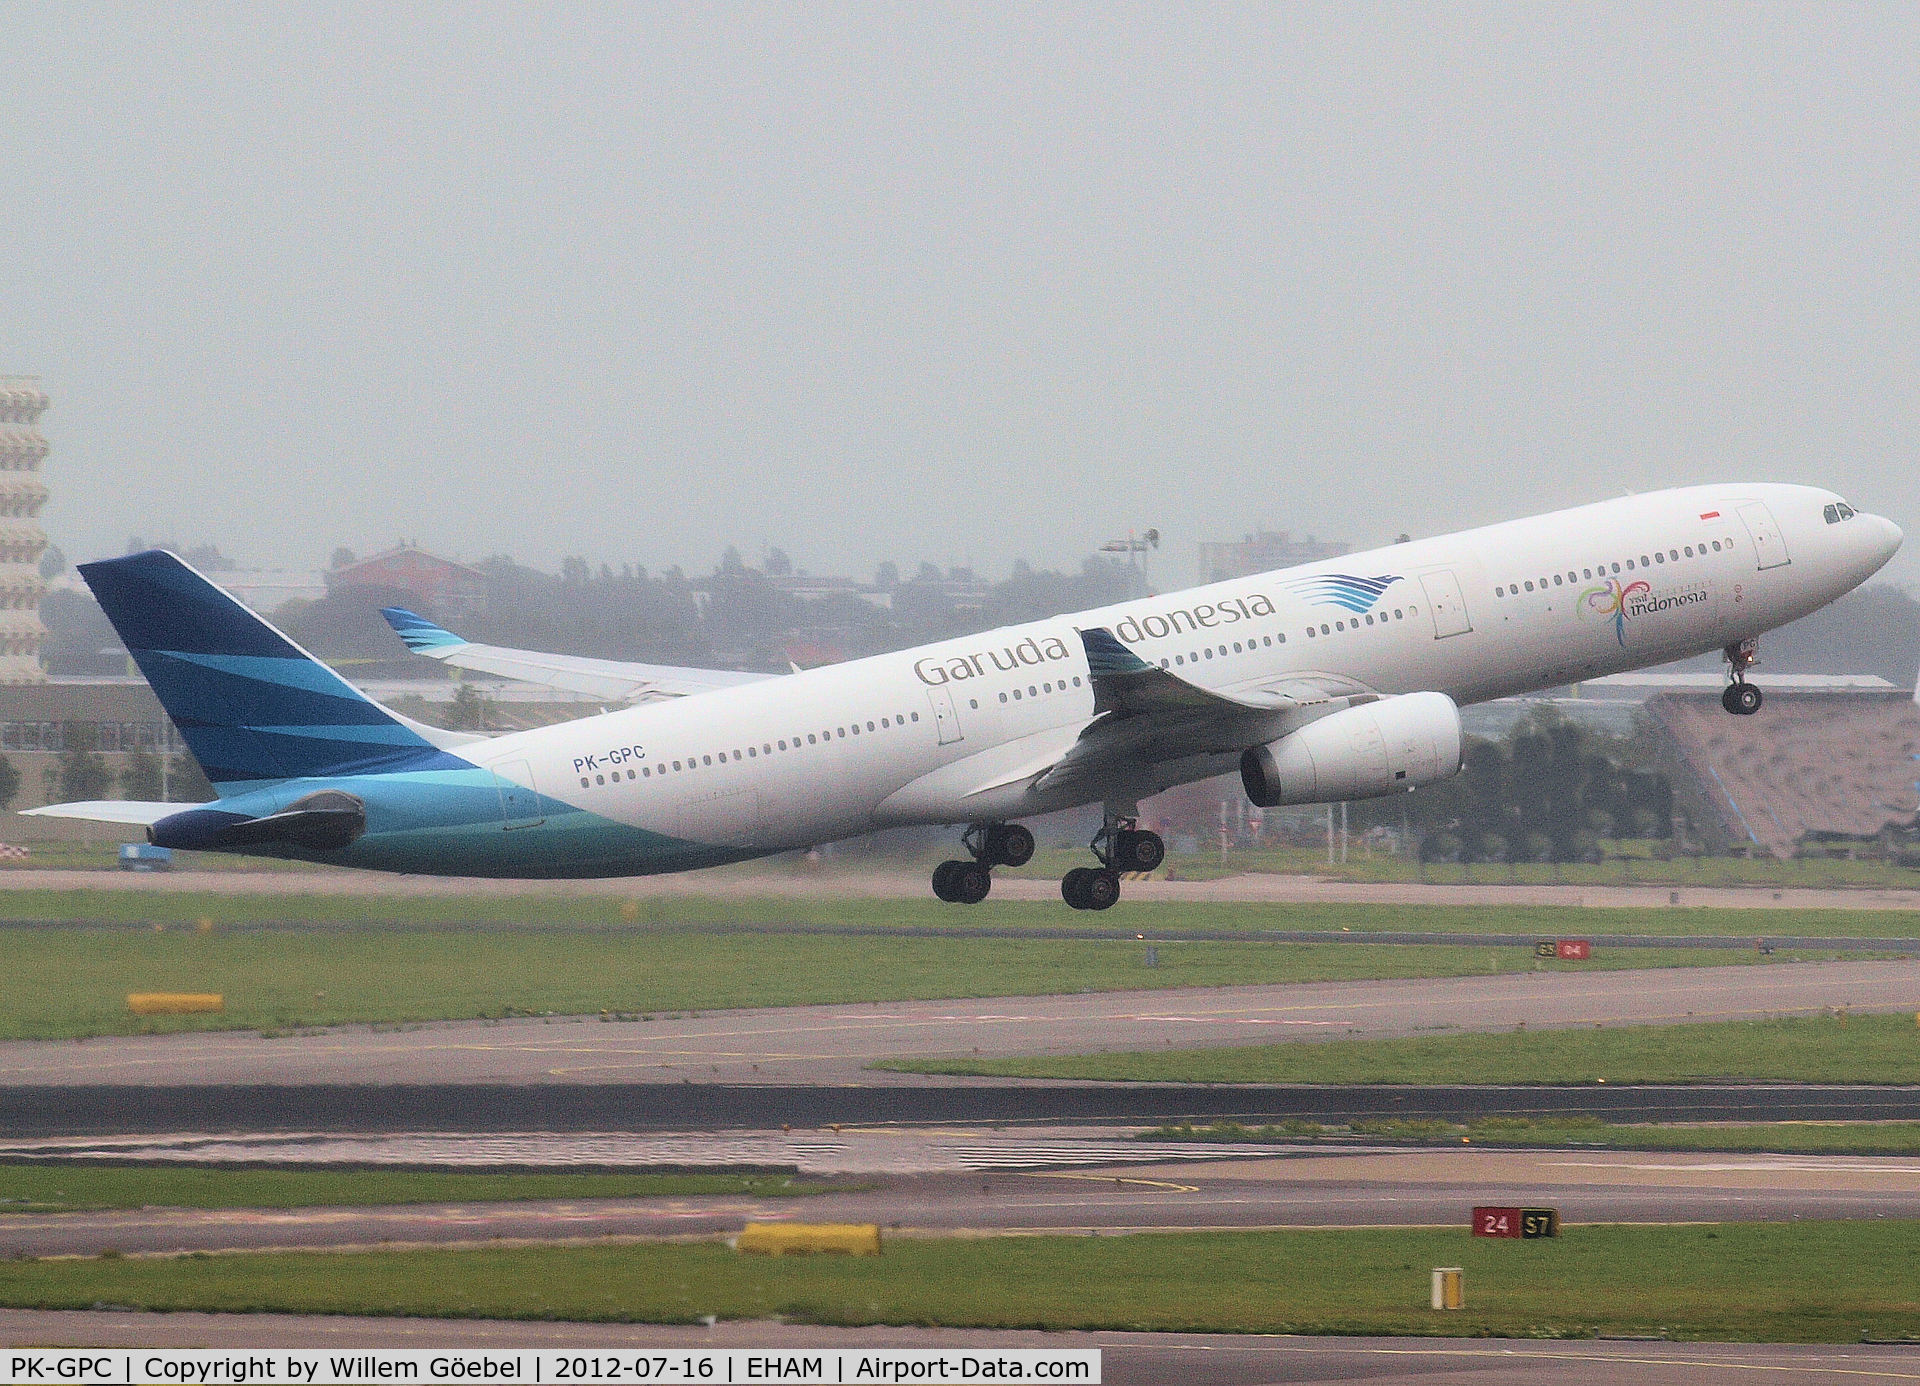 PK-GPC, 1996 Airbus A330-341 C/N 140, Take off from runway L18 of Schiphol Airport